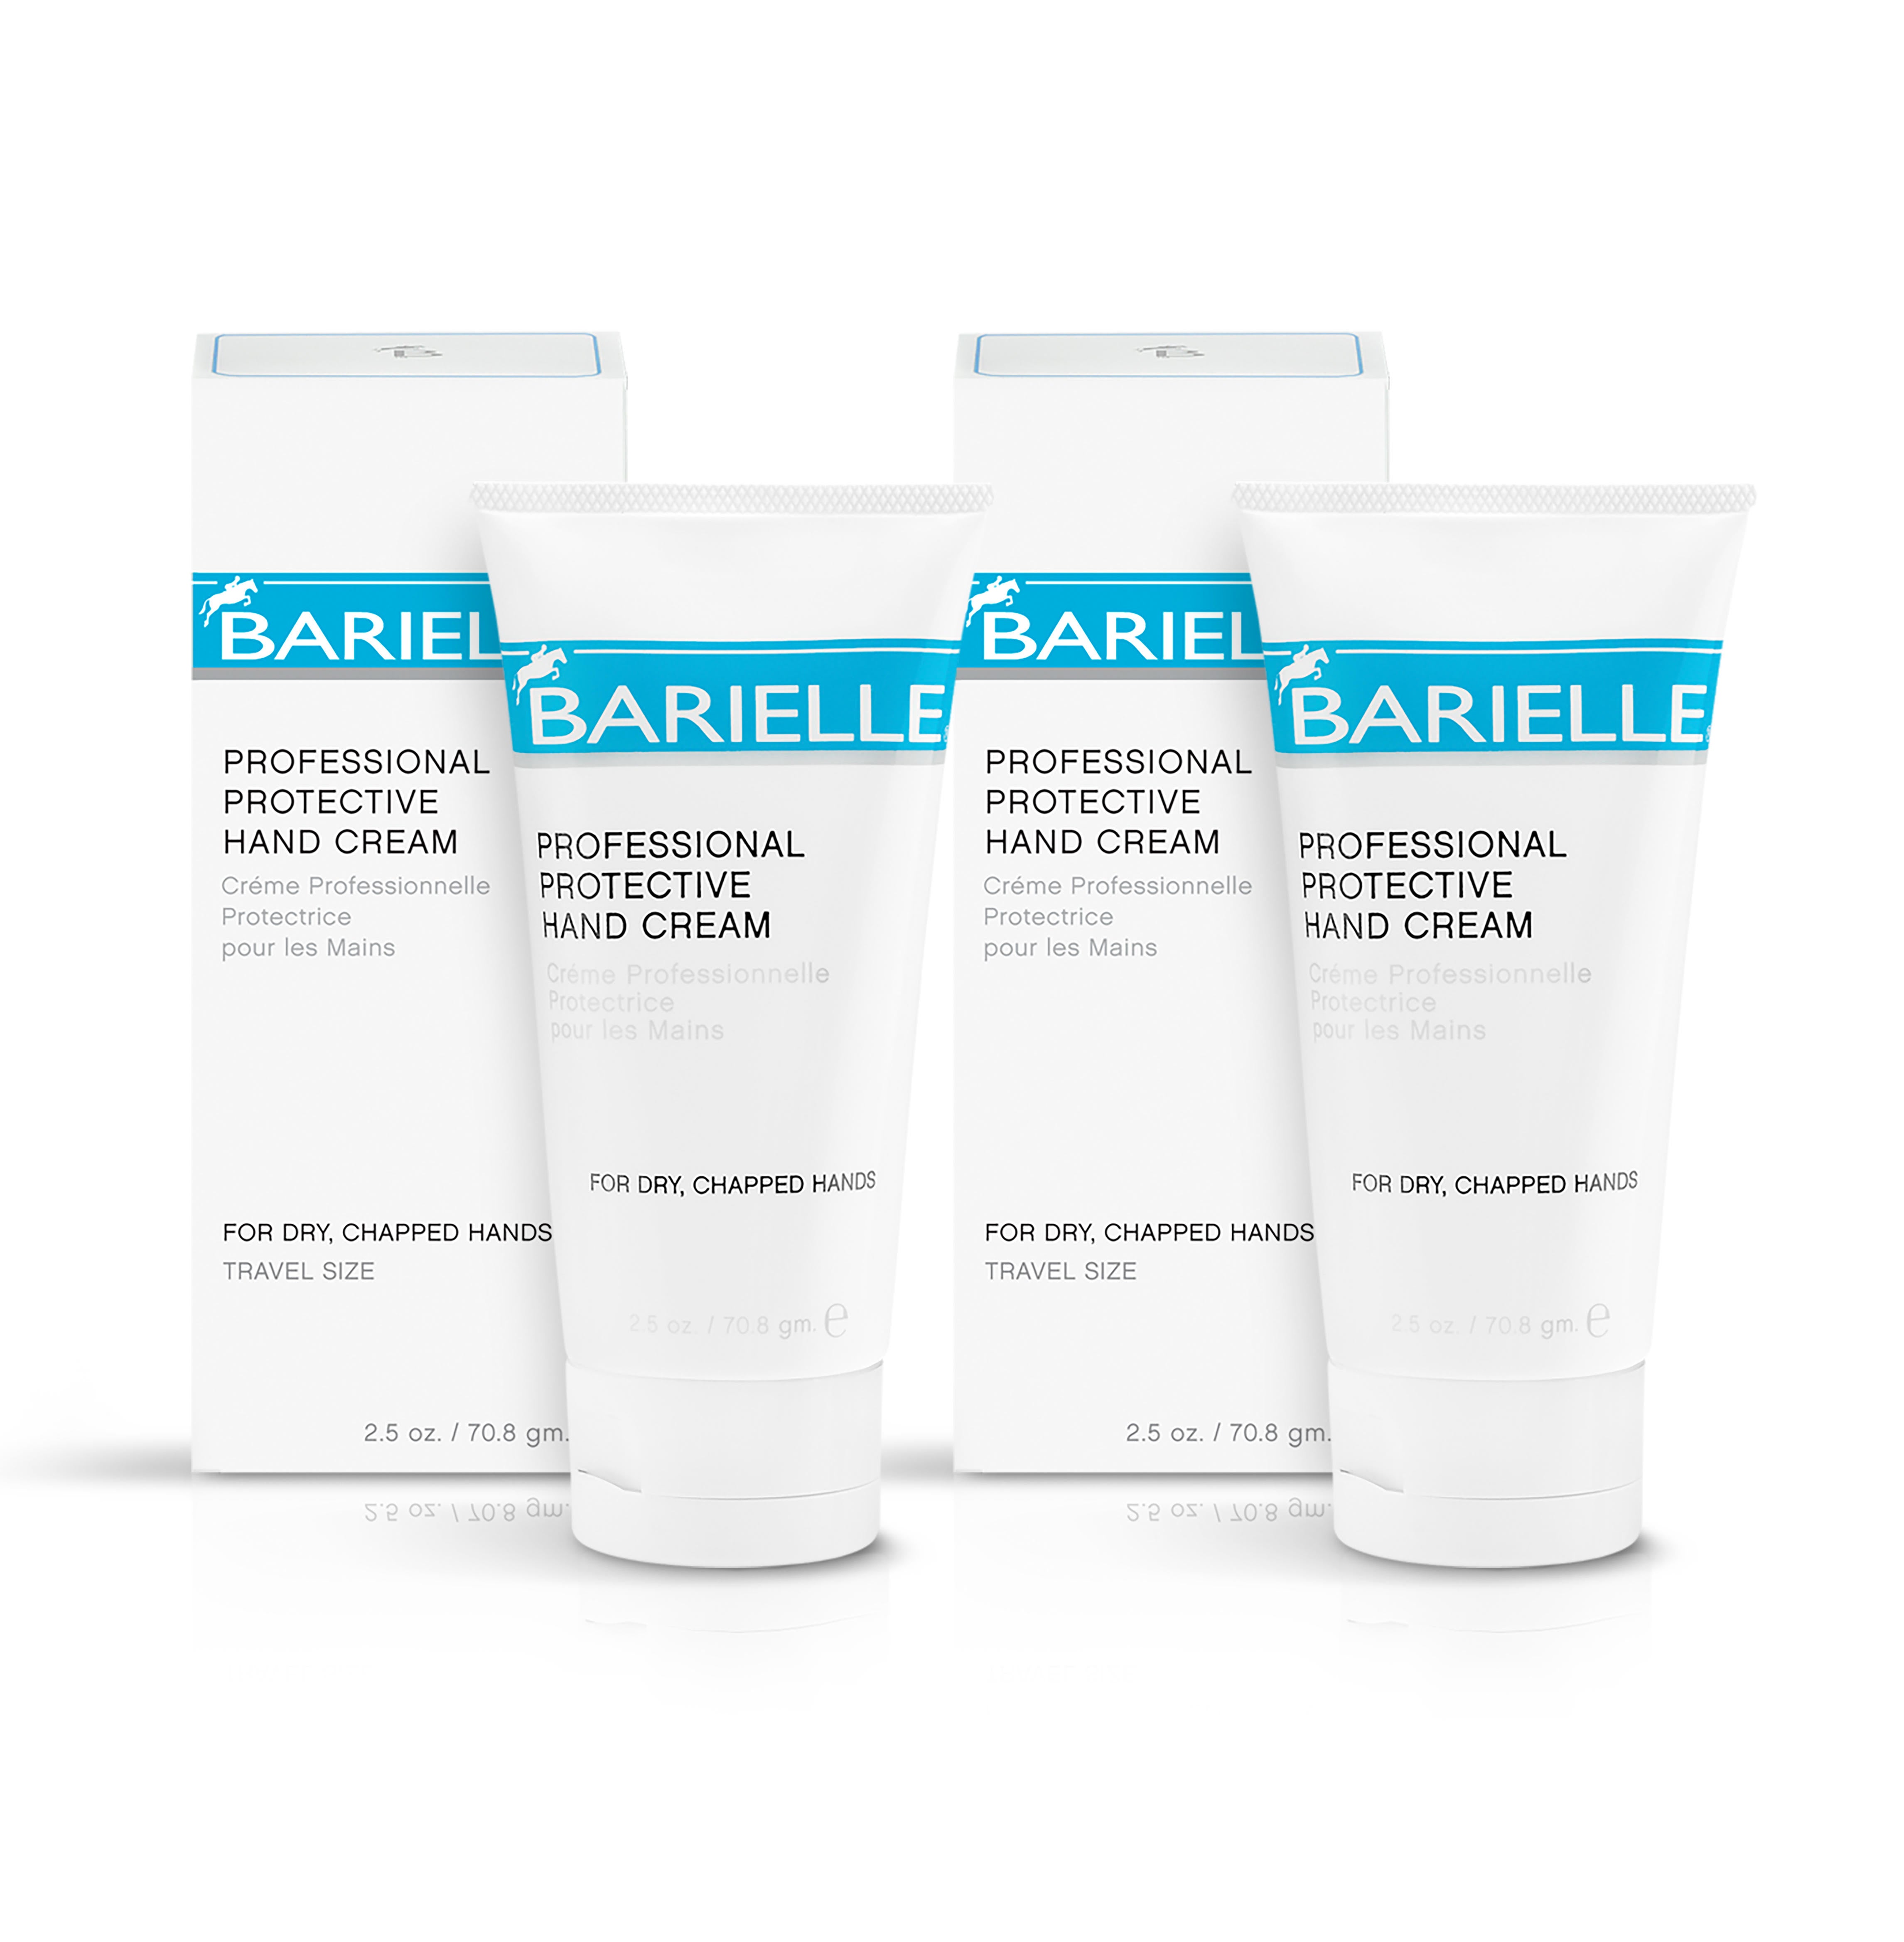 Barielle Professional Protective Hand Cream 2.5 oz. (2-PACK)